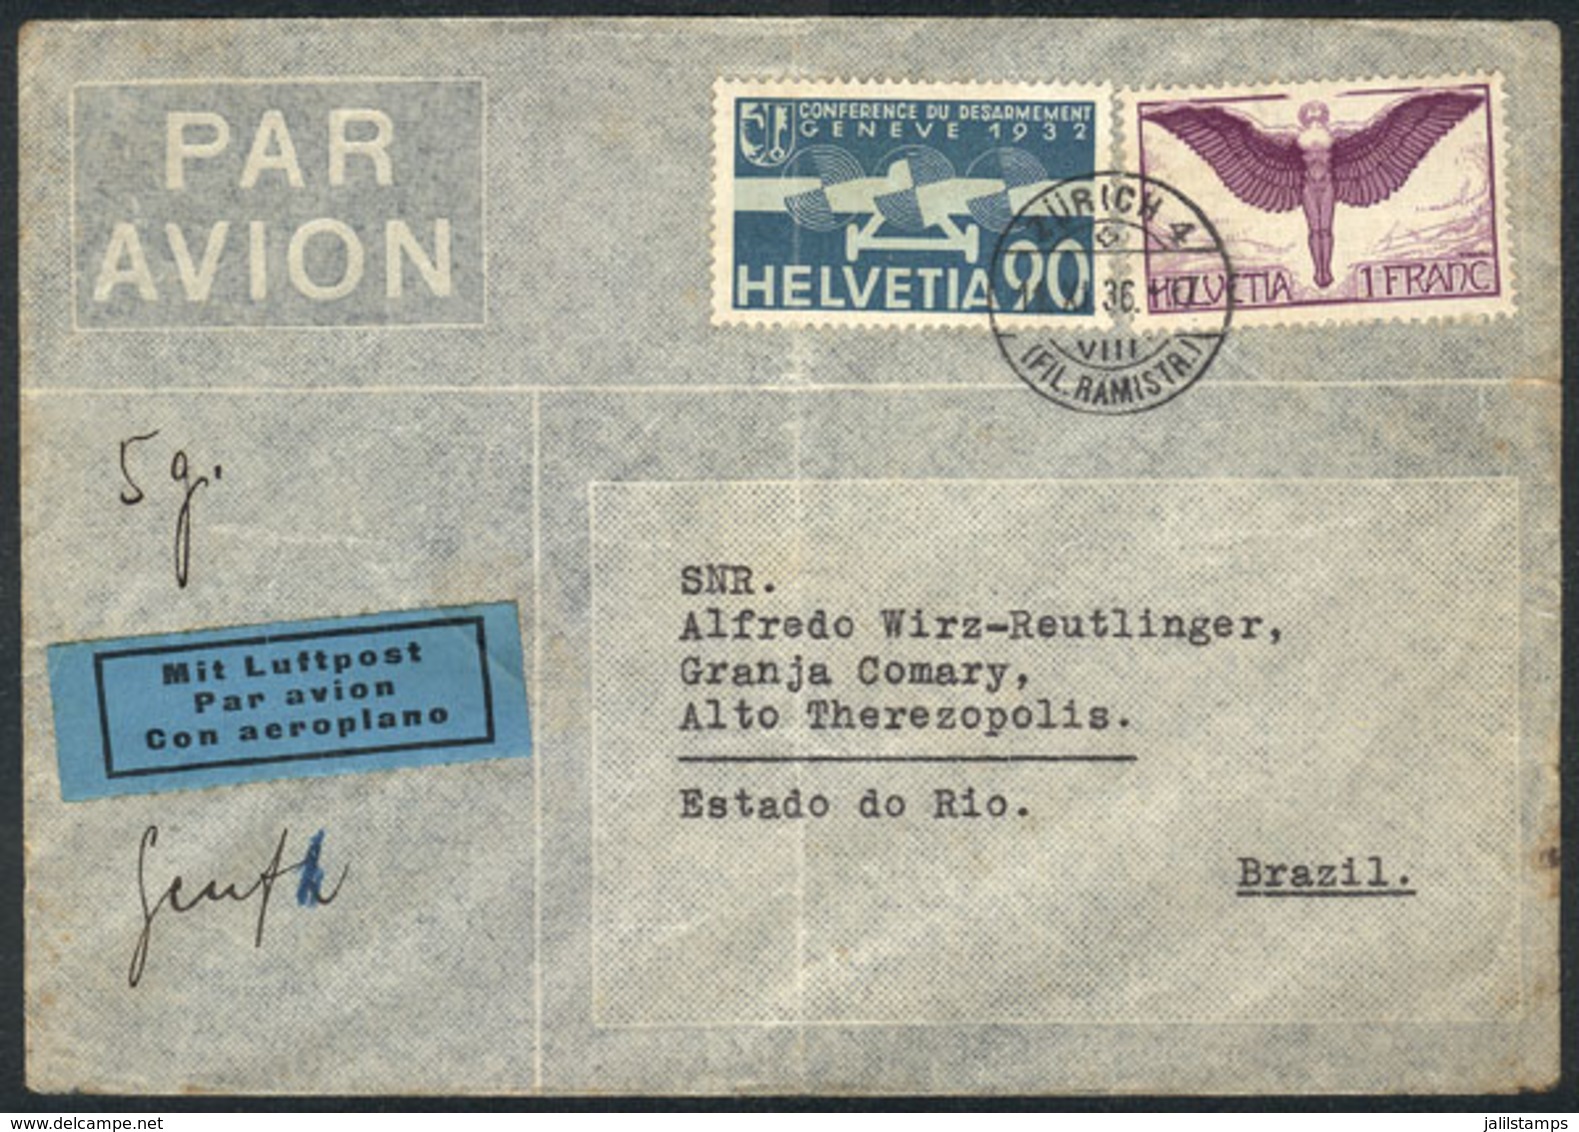 SWITZERLAND: Airmail Cover Sent From Zürich To Brazil On 11/NO/1936 Franked With 1.90Fr., Minor Defect, Very Good Appear - ...-1845 Préphilatélie